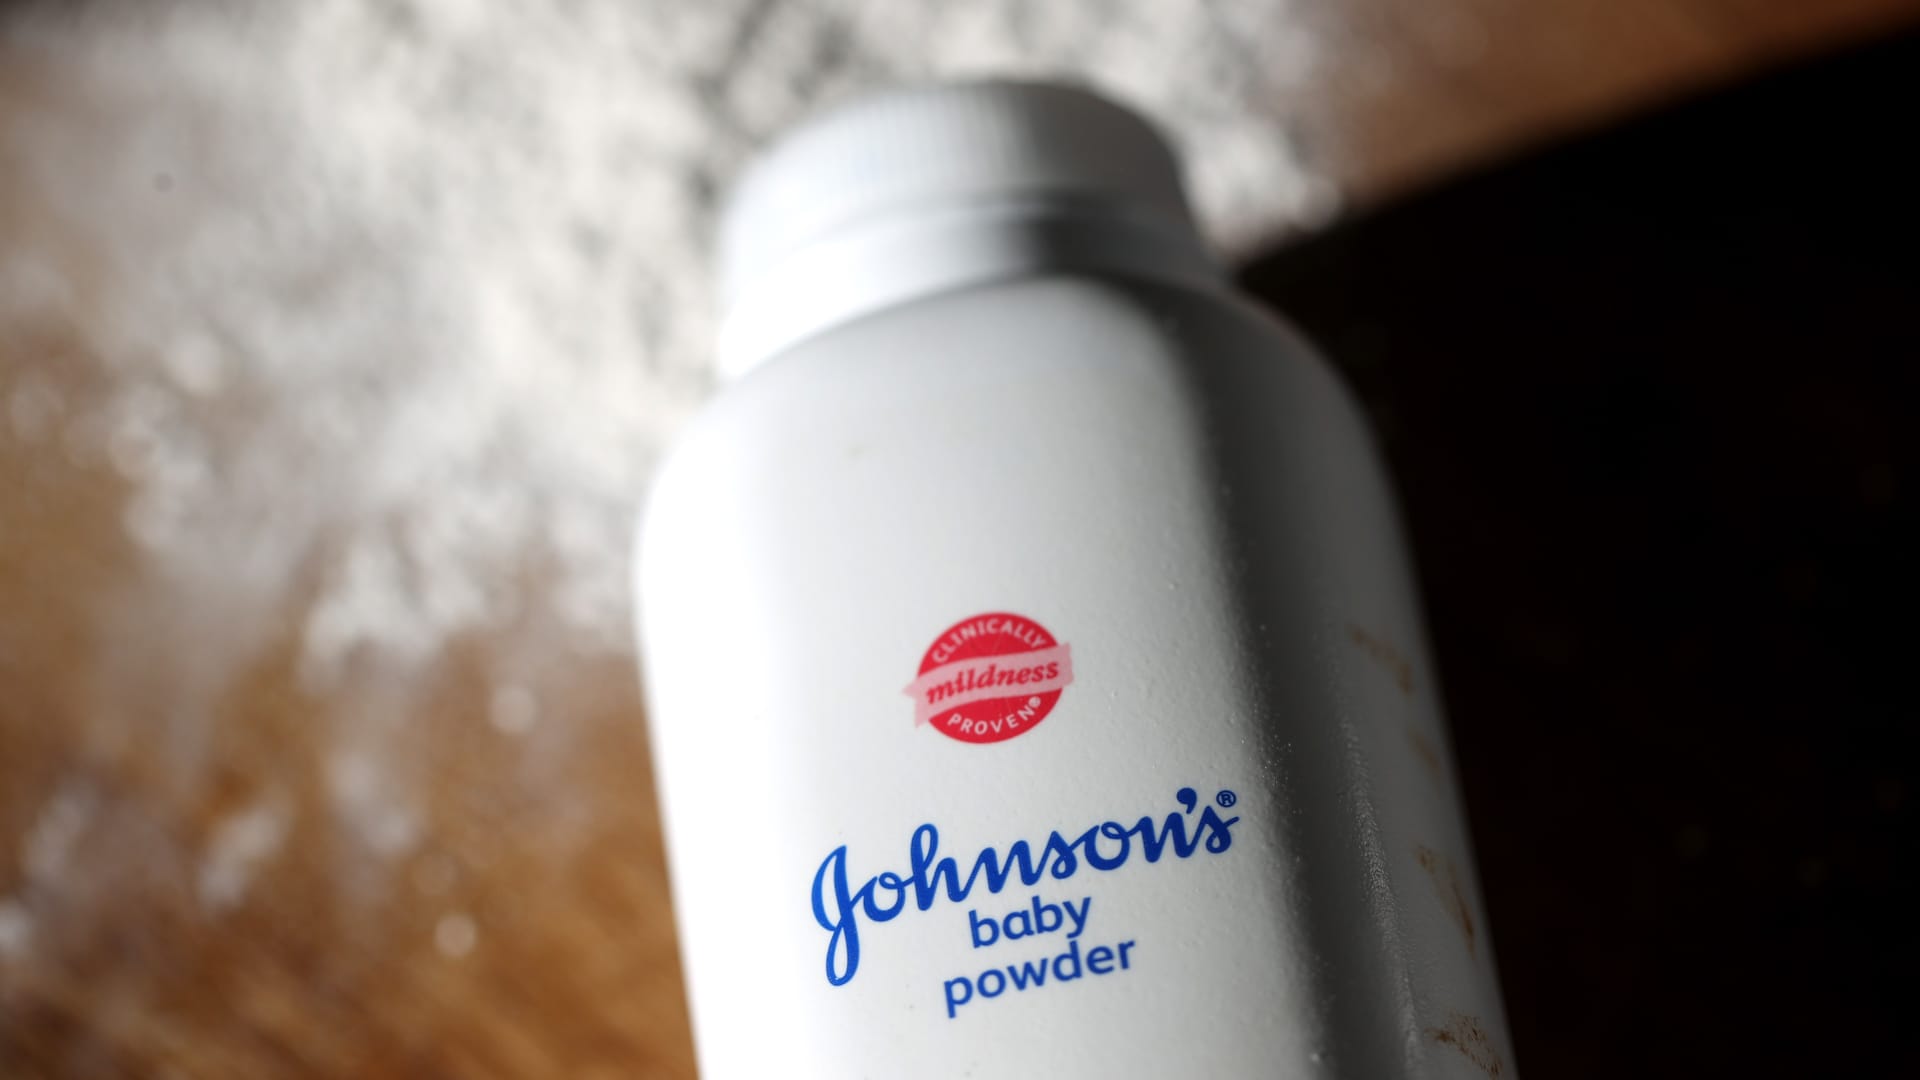 Study links talc to ovarian cancer, with implications for J&J